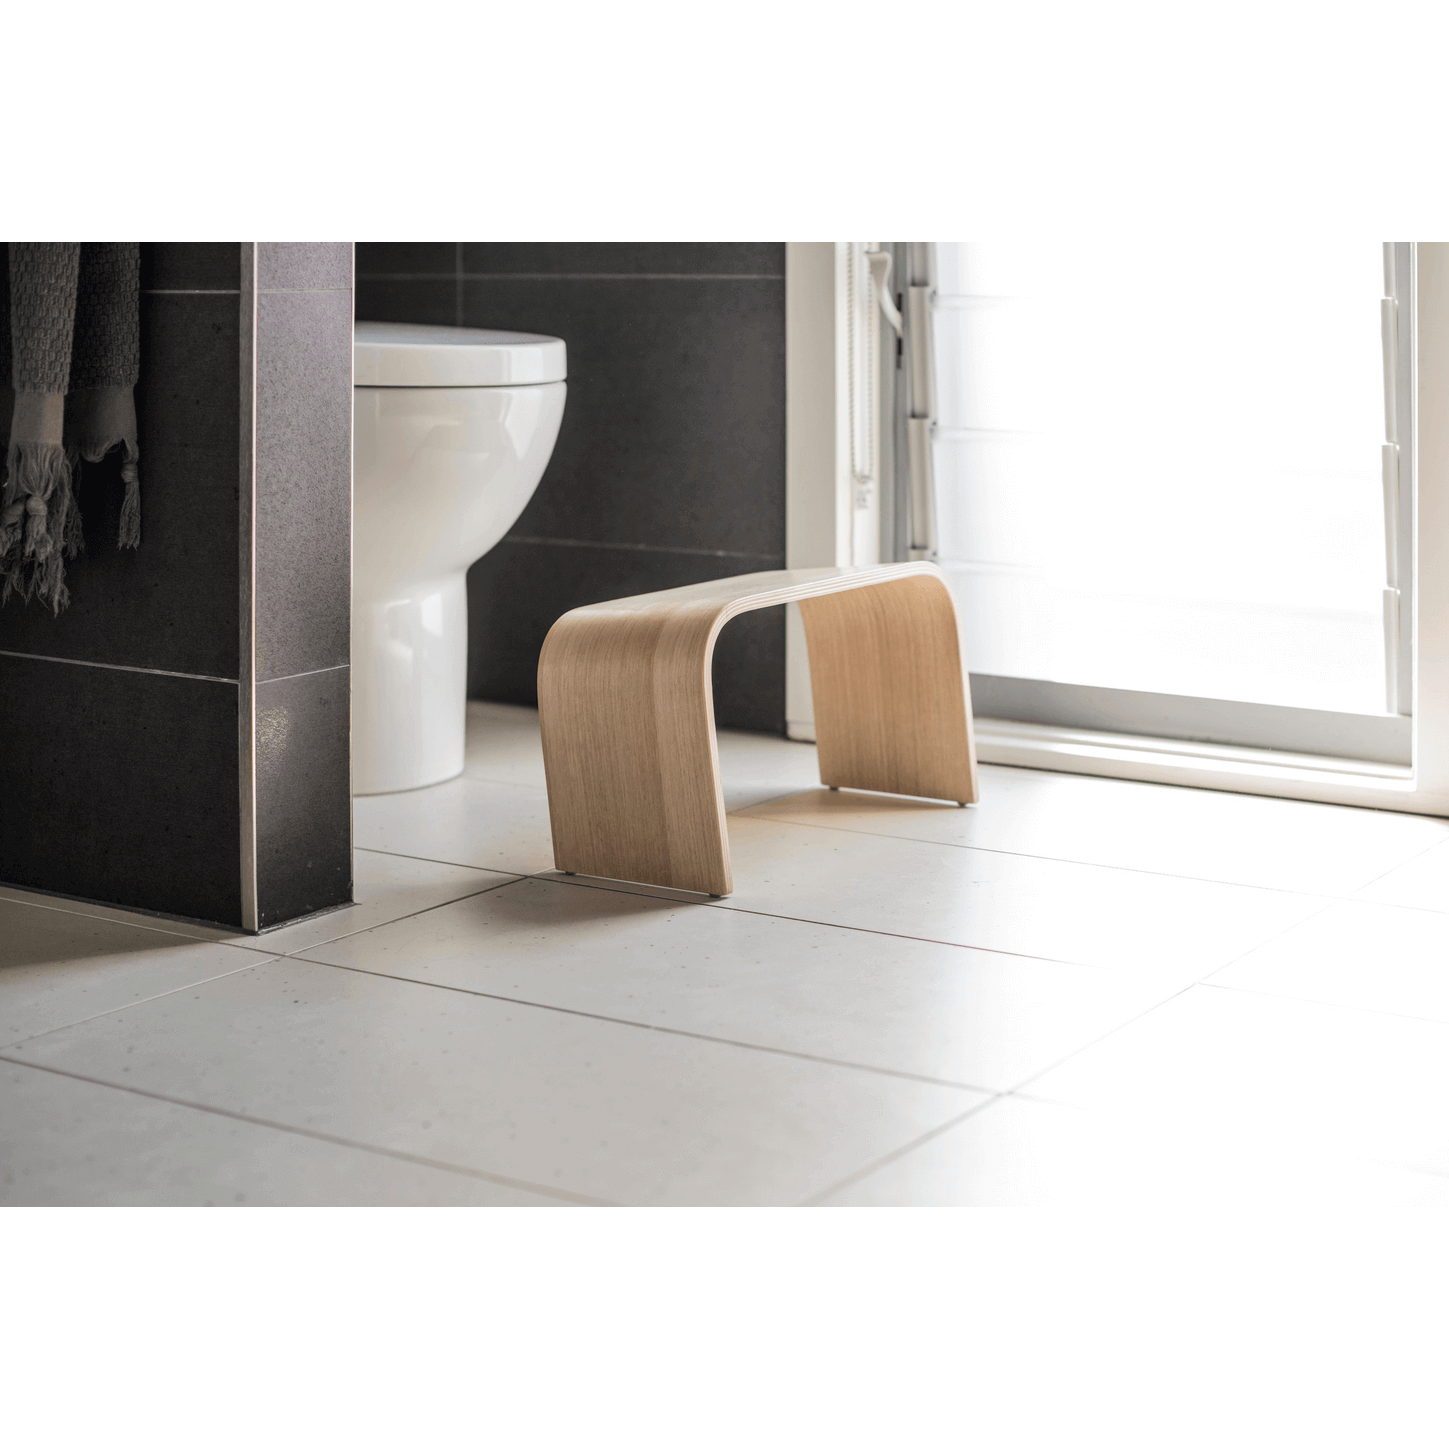 The PROPPR Timber - Tasmanian Oak Toilet Foot Stool - side angled view in a bathroom